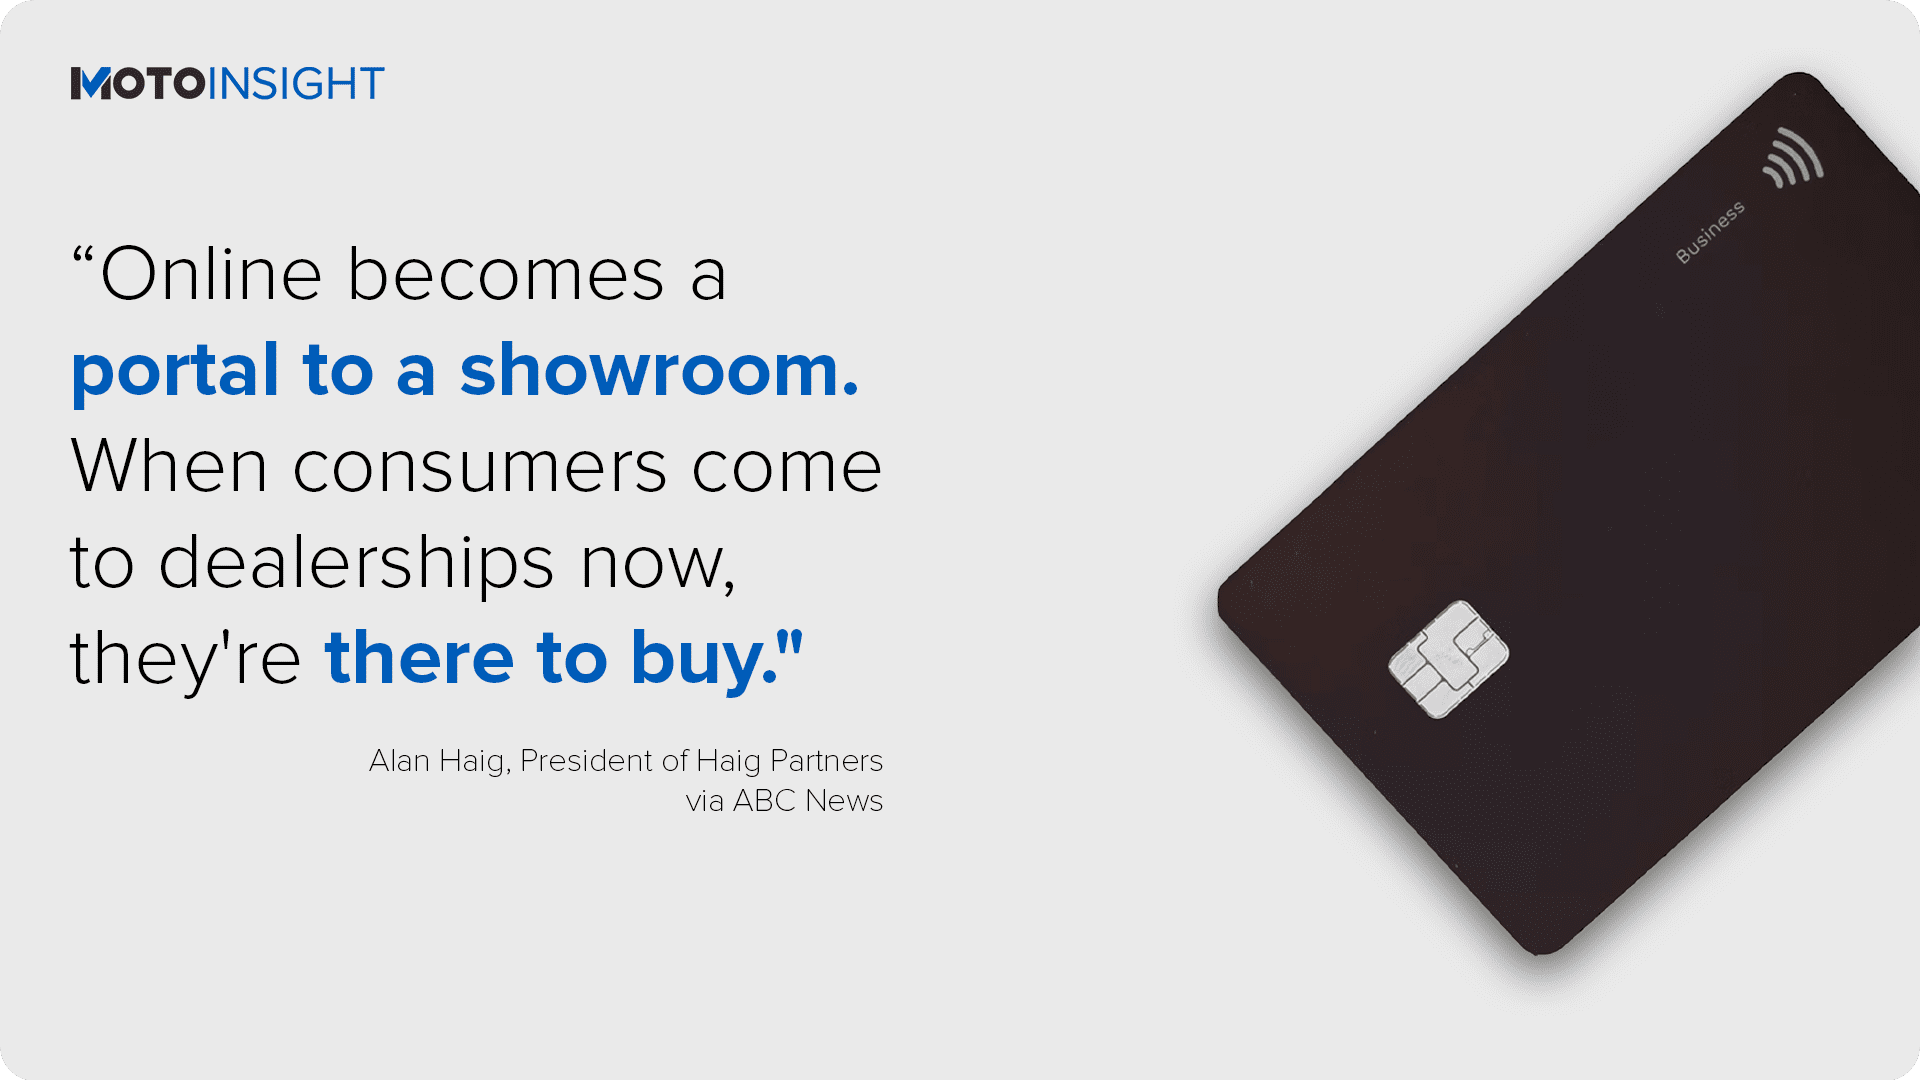 “Online becomes a portal to a showroom. When consumers come to dealerships now, they're there to buy." credit card